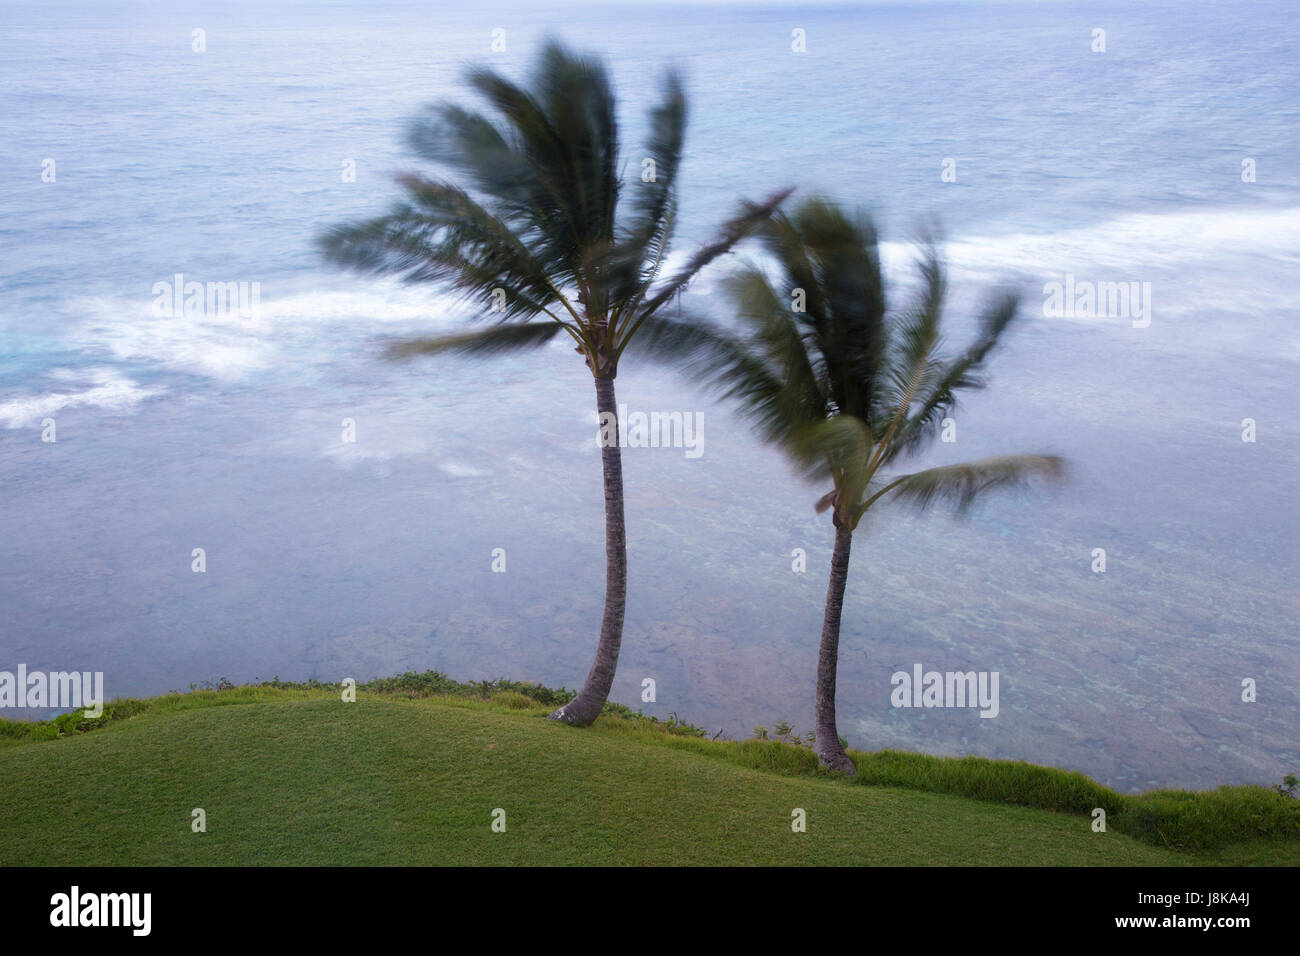 Palm trees blowing in a strong wind during a storm on the Pacific coast of Hawaii Stock Photo